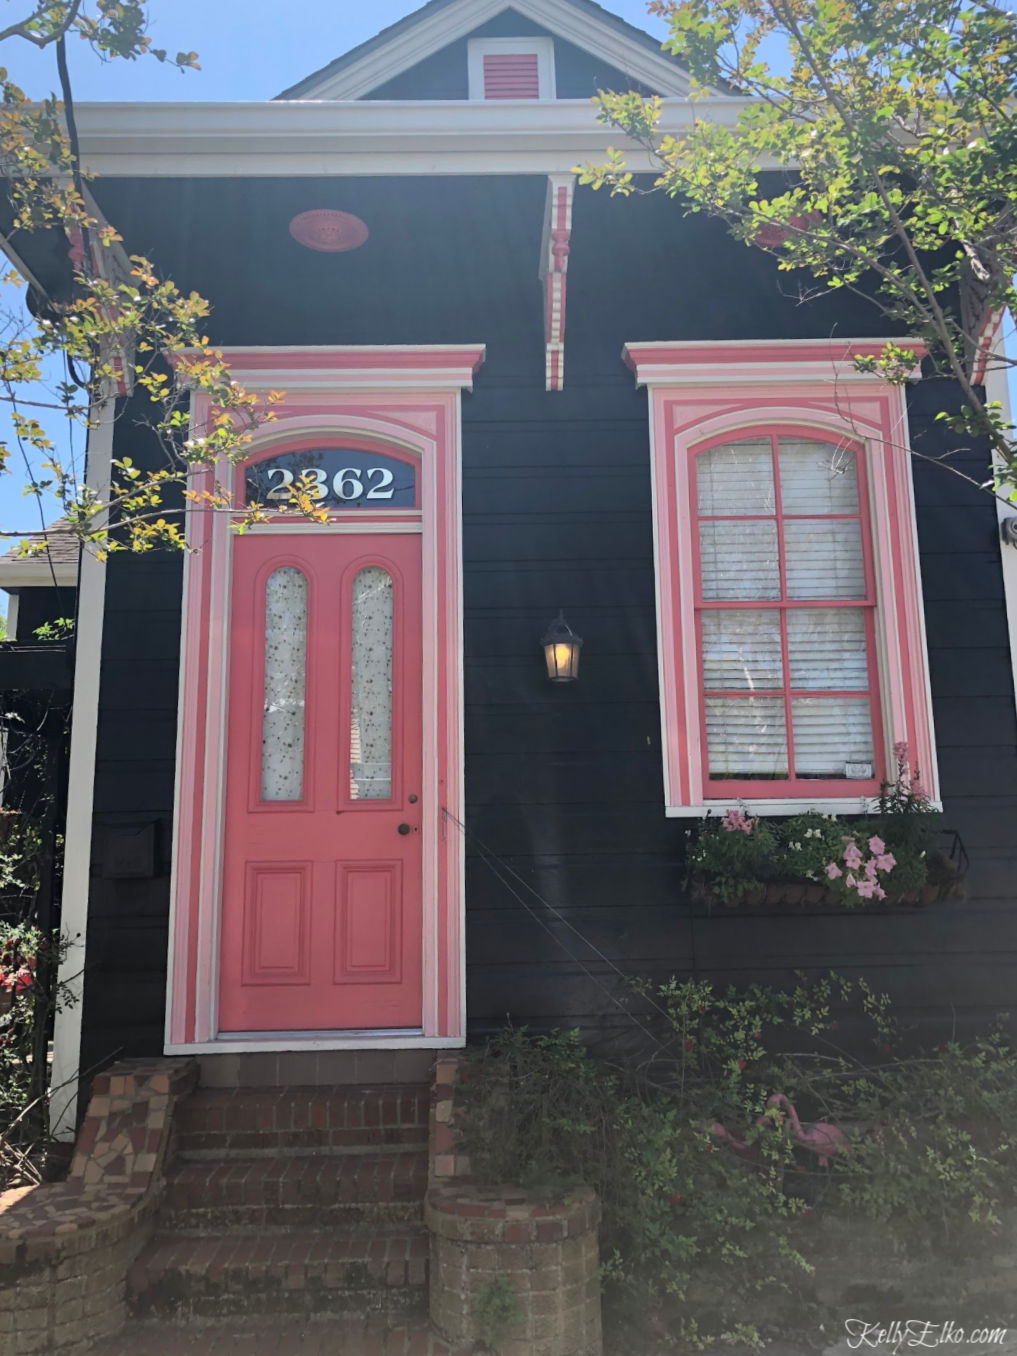 Top 10 Photos 2019 - this stunning black cottage with pink doors and trim is so whimsical kellyelko.com #nola #nolahomes #nolaarchitecture #neworleans #blackhouse #pink #pinkhouse #curbappeal #oldhome #oldhouse #kellyelko